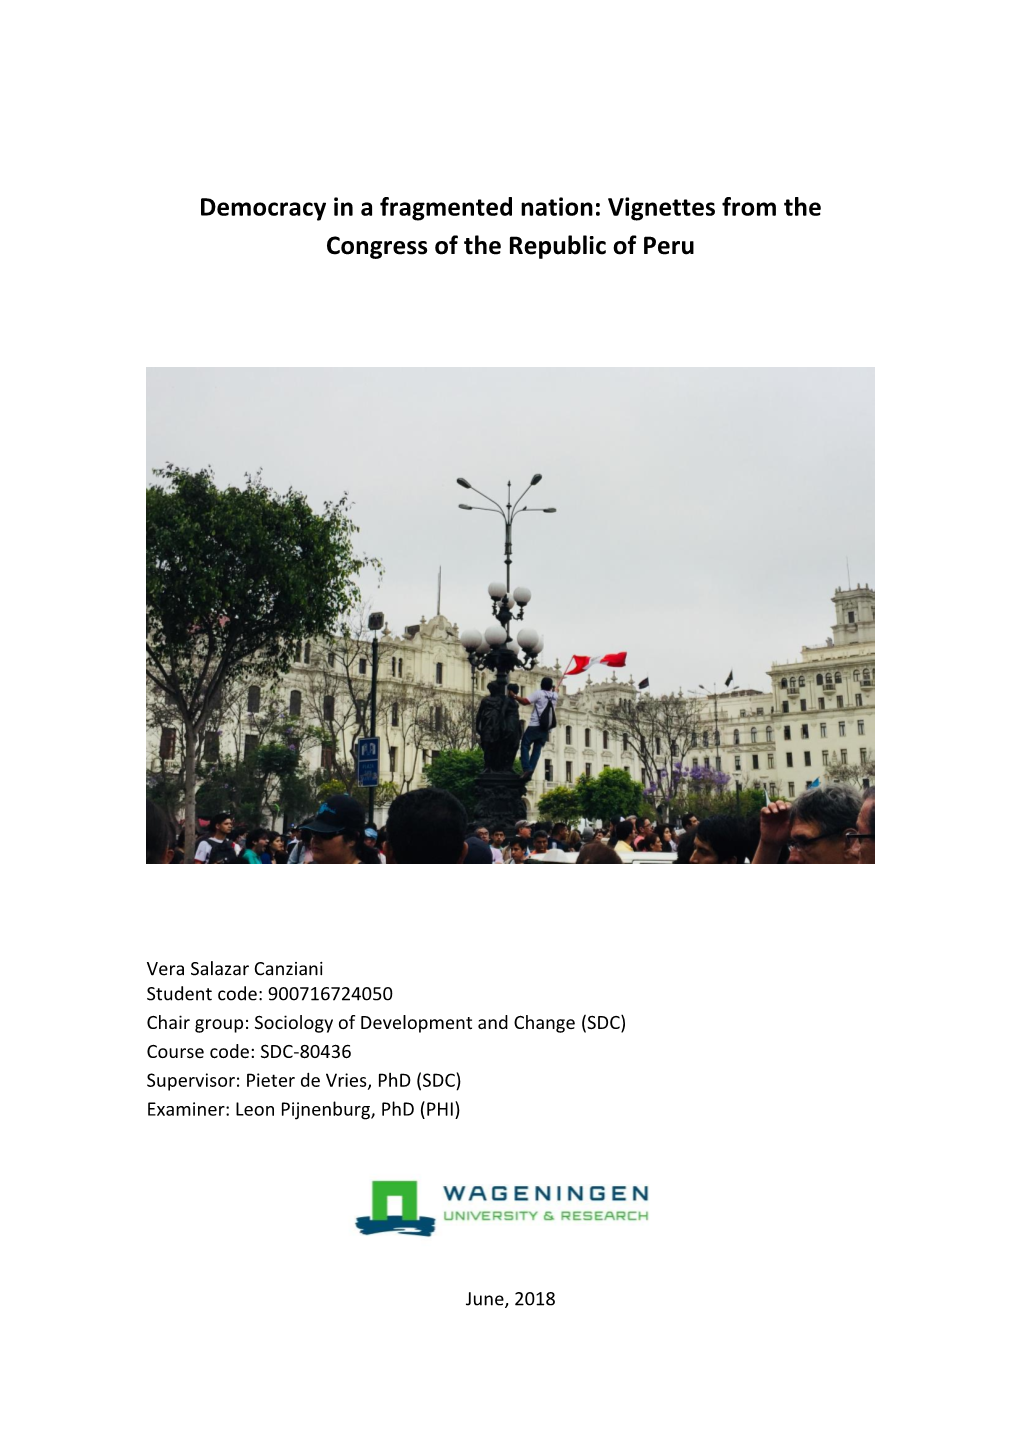 Democracy in a Fragmented Nation: Vignettes from the Congress of the Republic of Peru